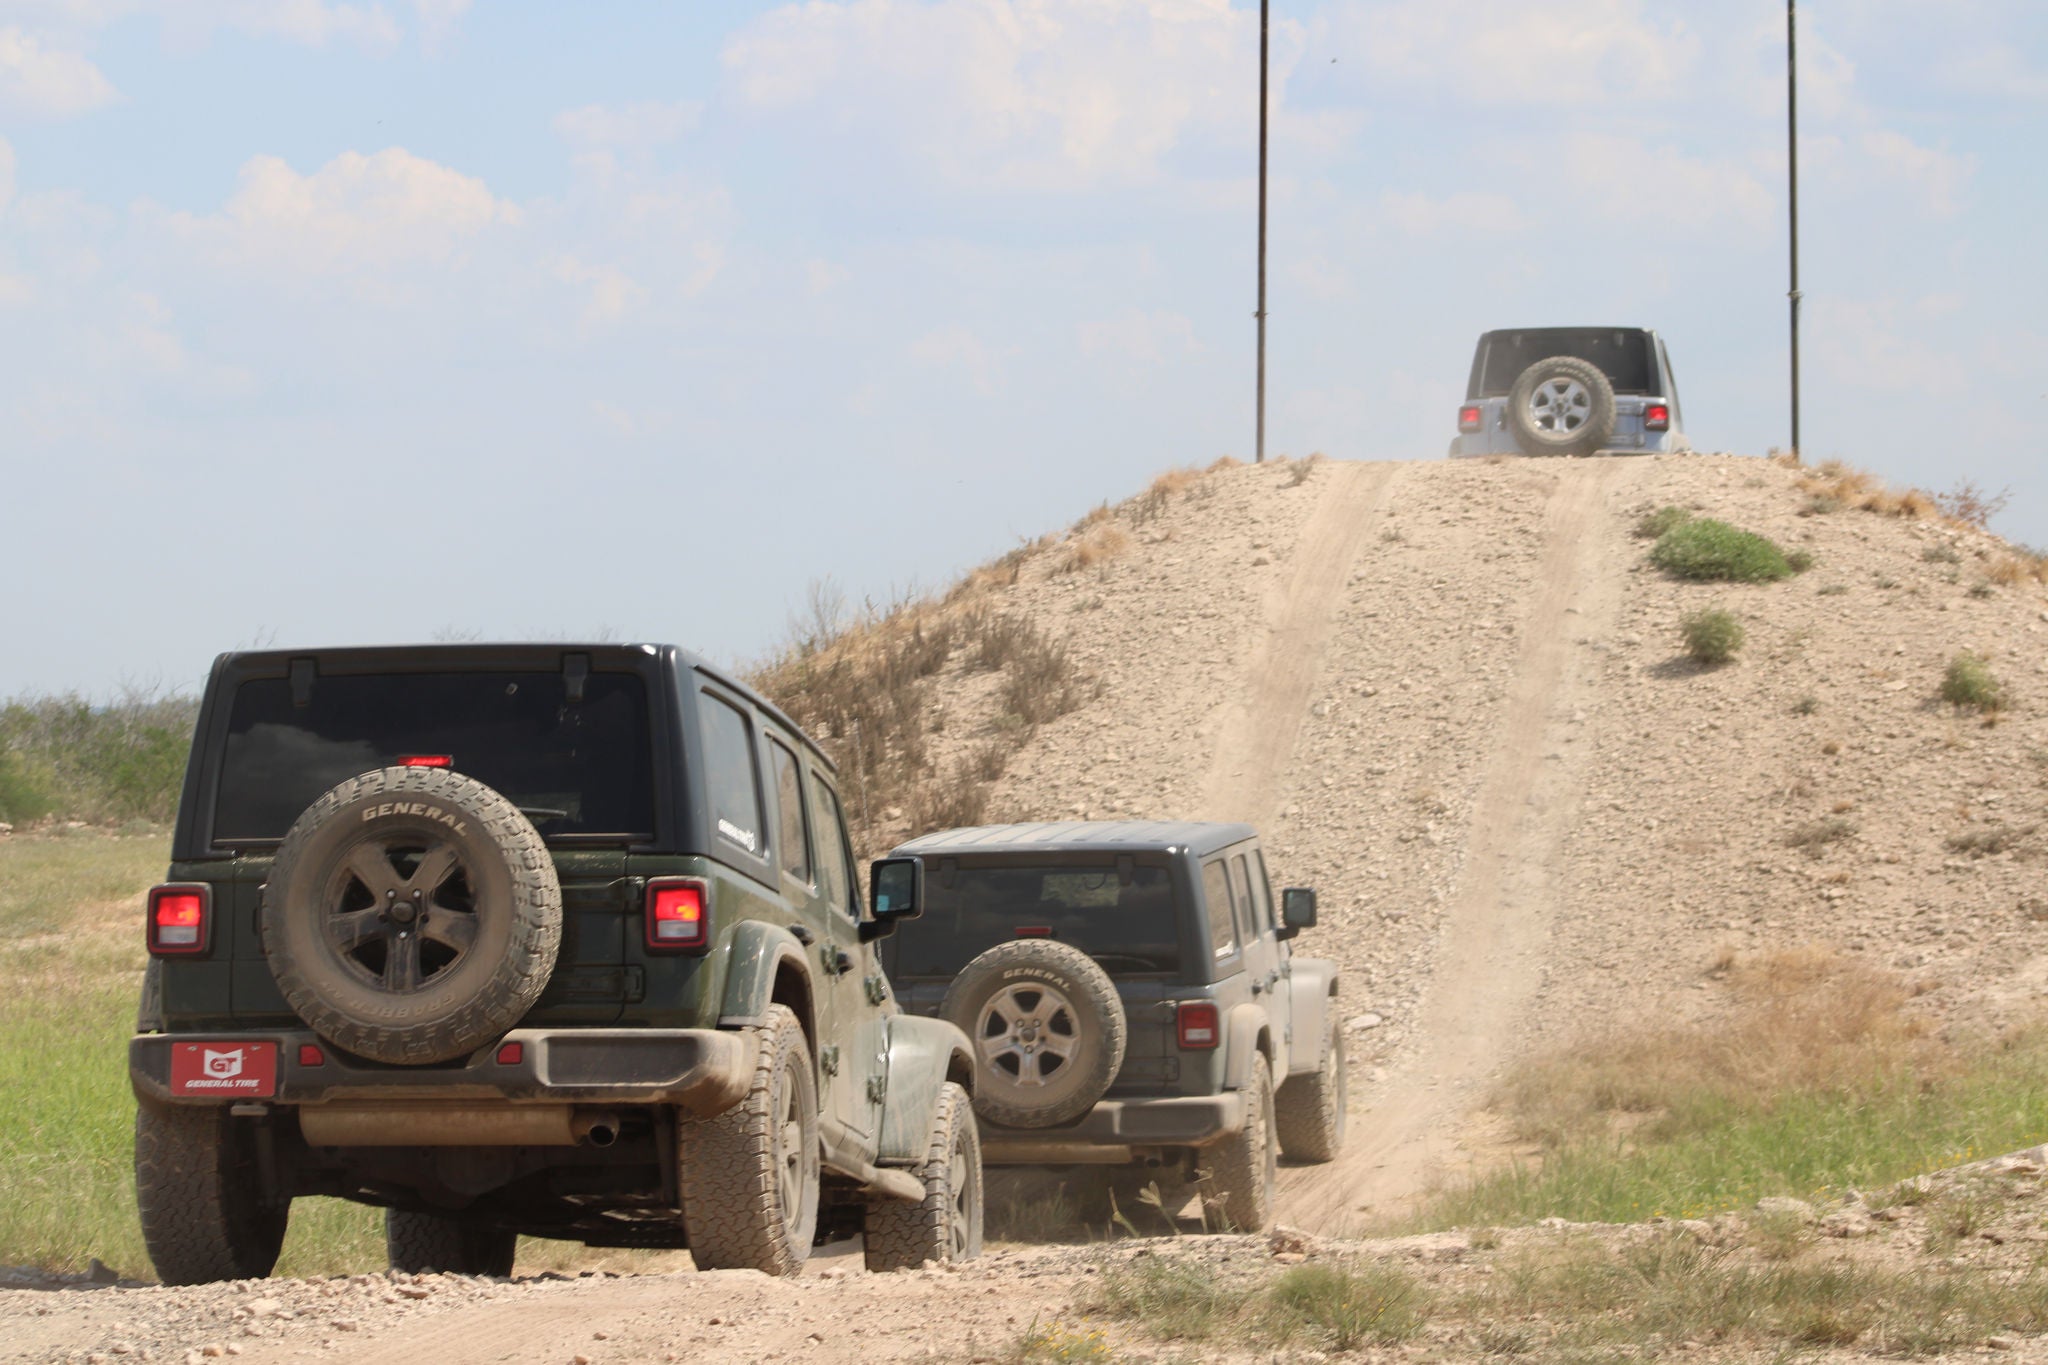 Jeeps on General Tires conquering the rugged hill at UPG pushing traction and durability to the limit. 